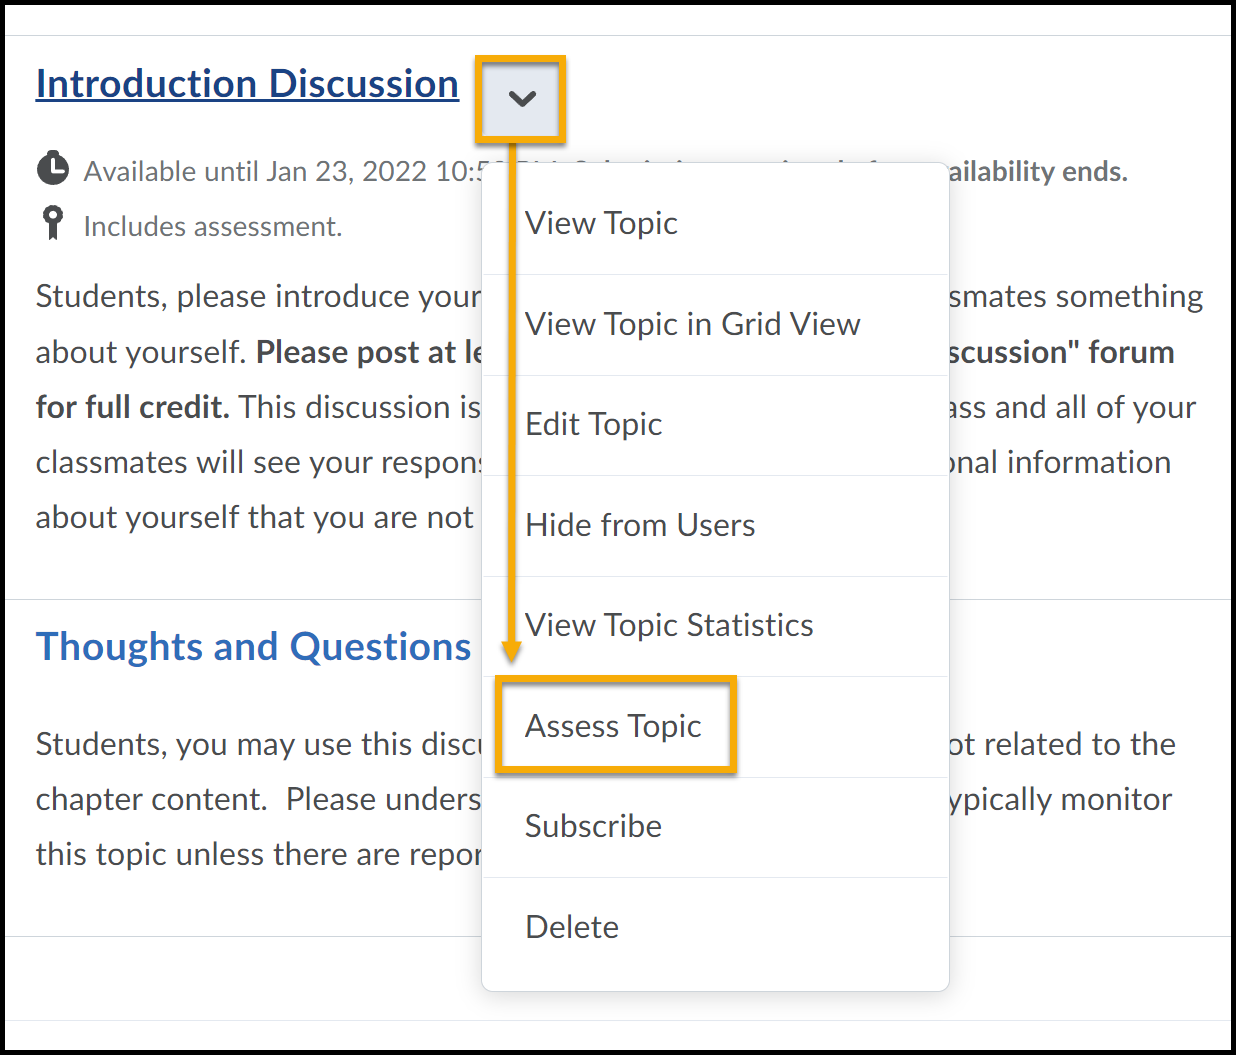 Sample discussion context menu expanded to Assess Topic.